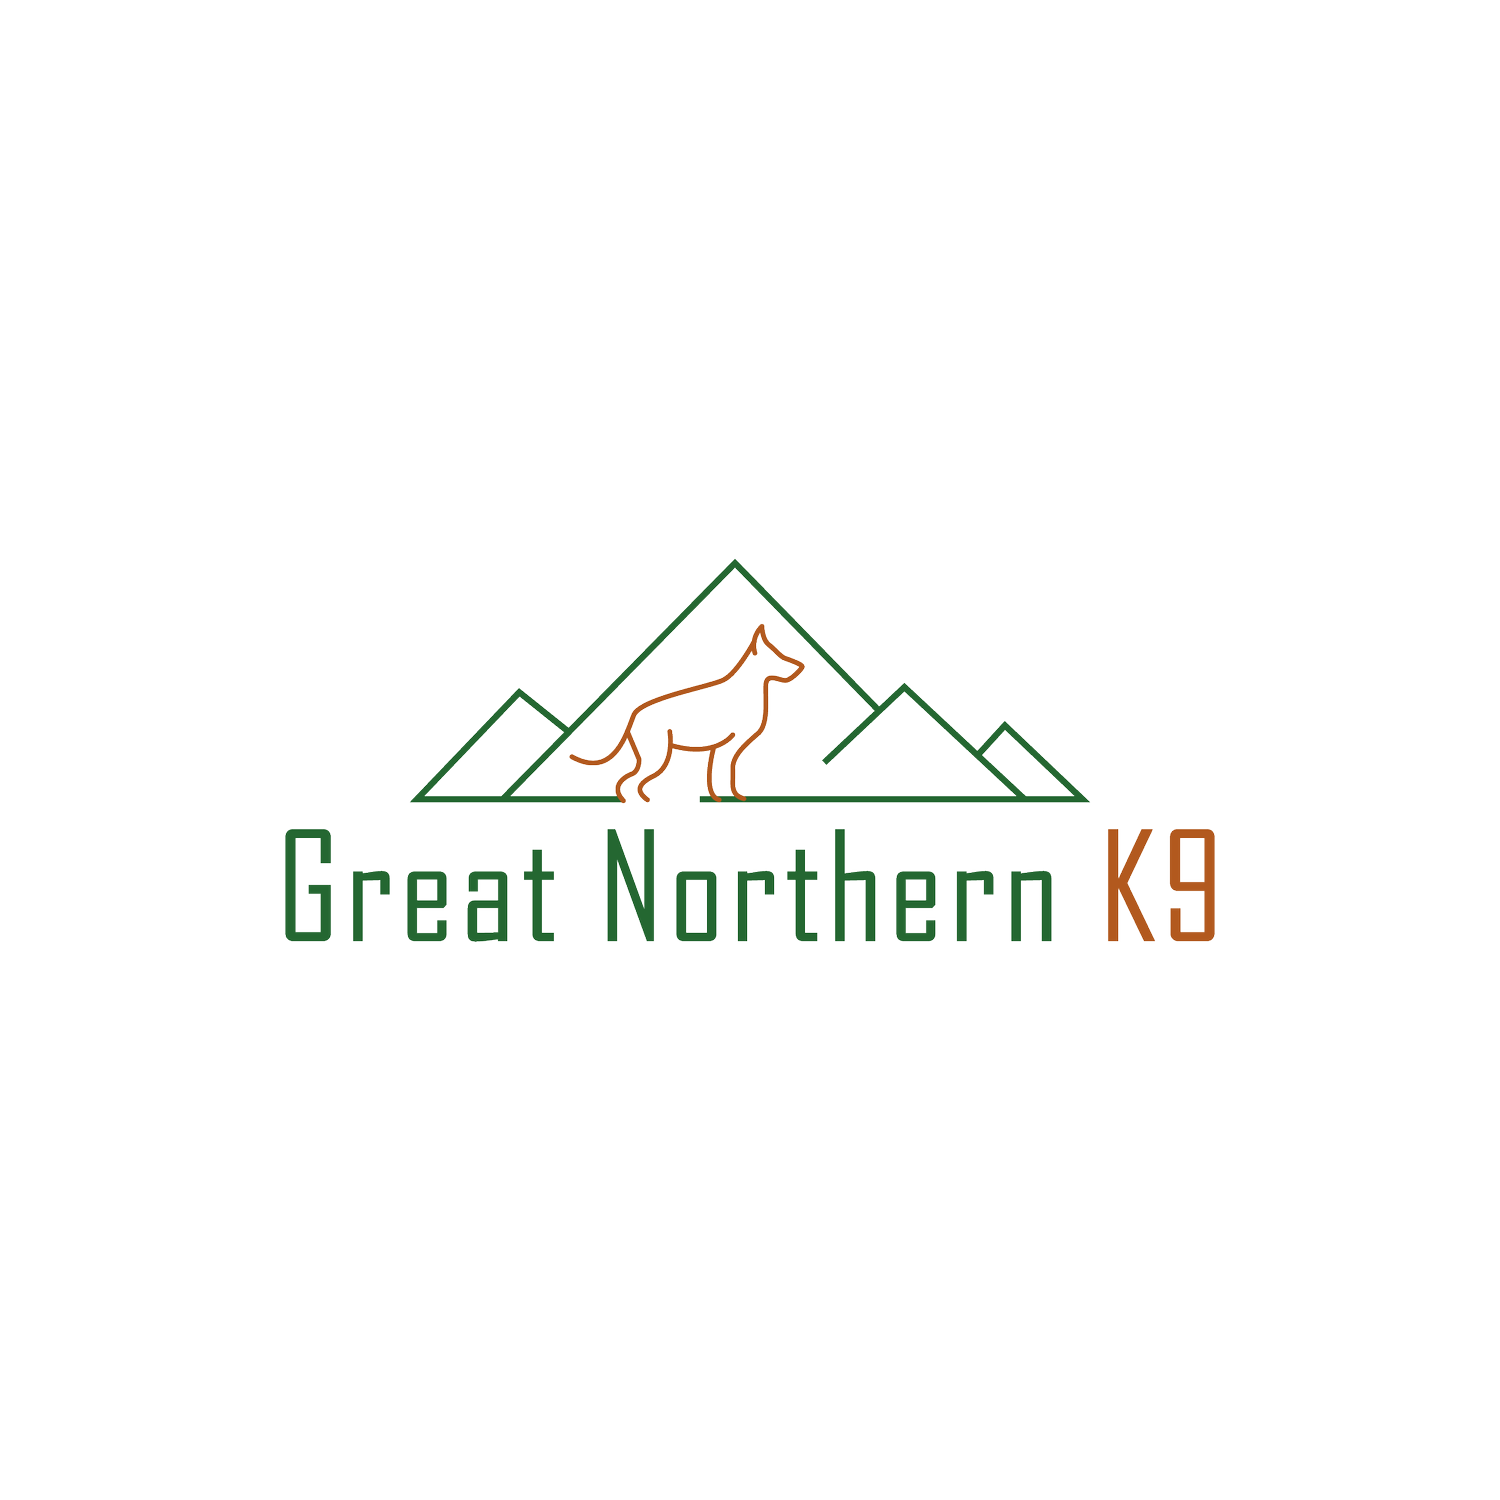 Great Northern K9